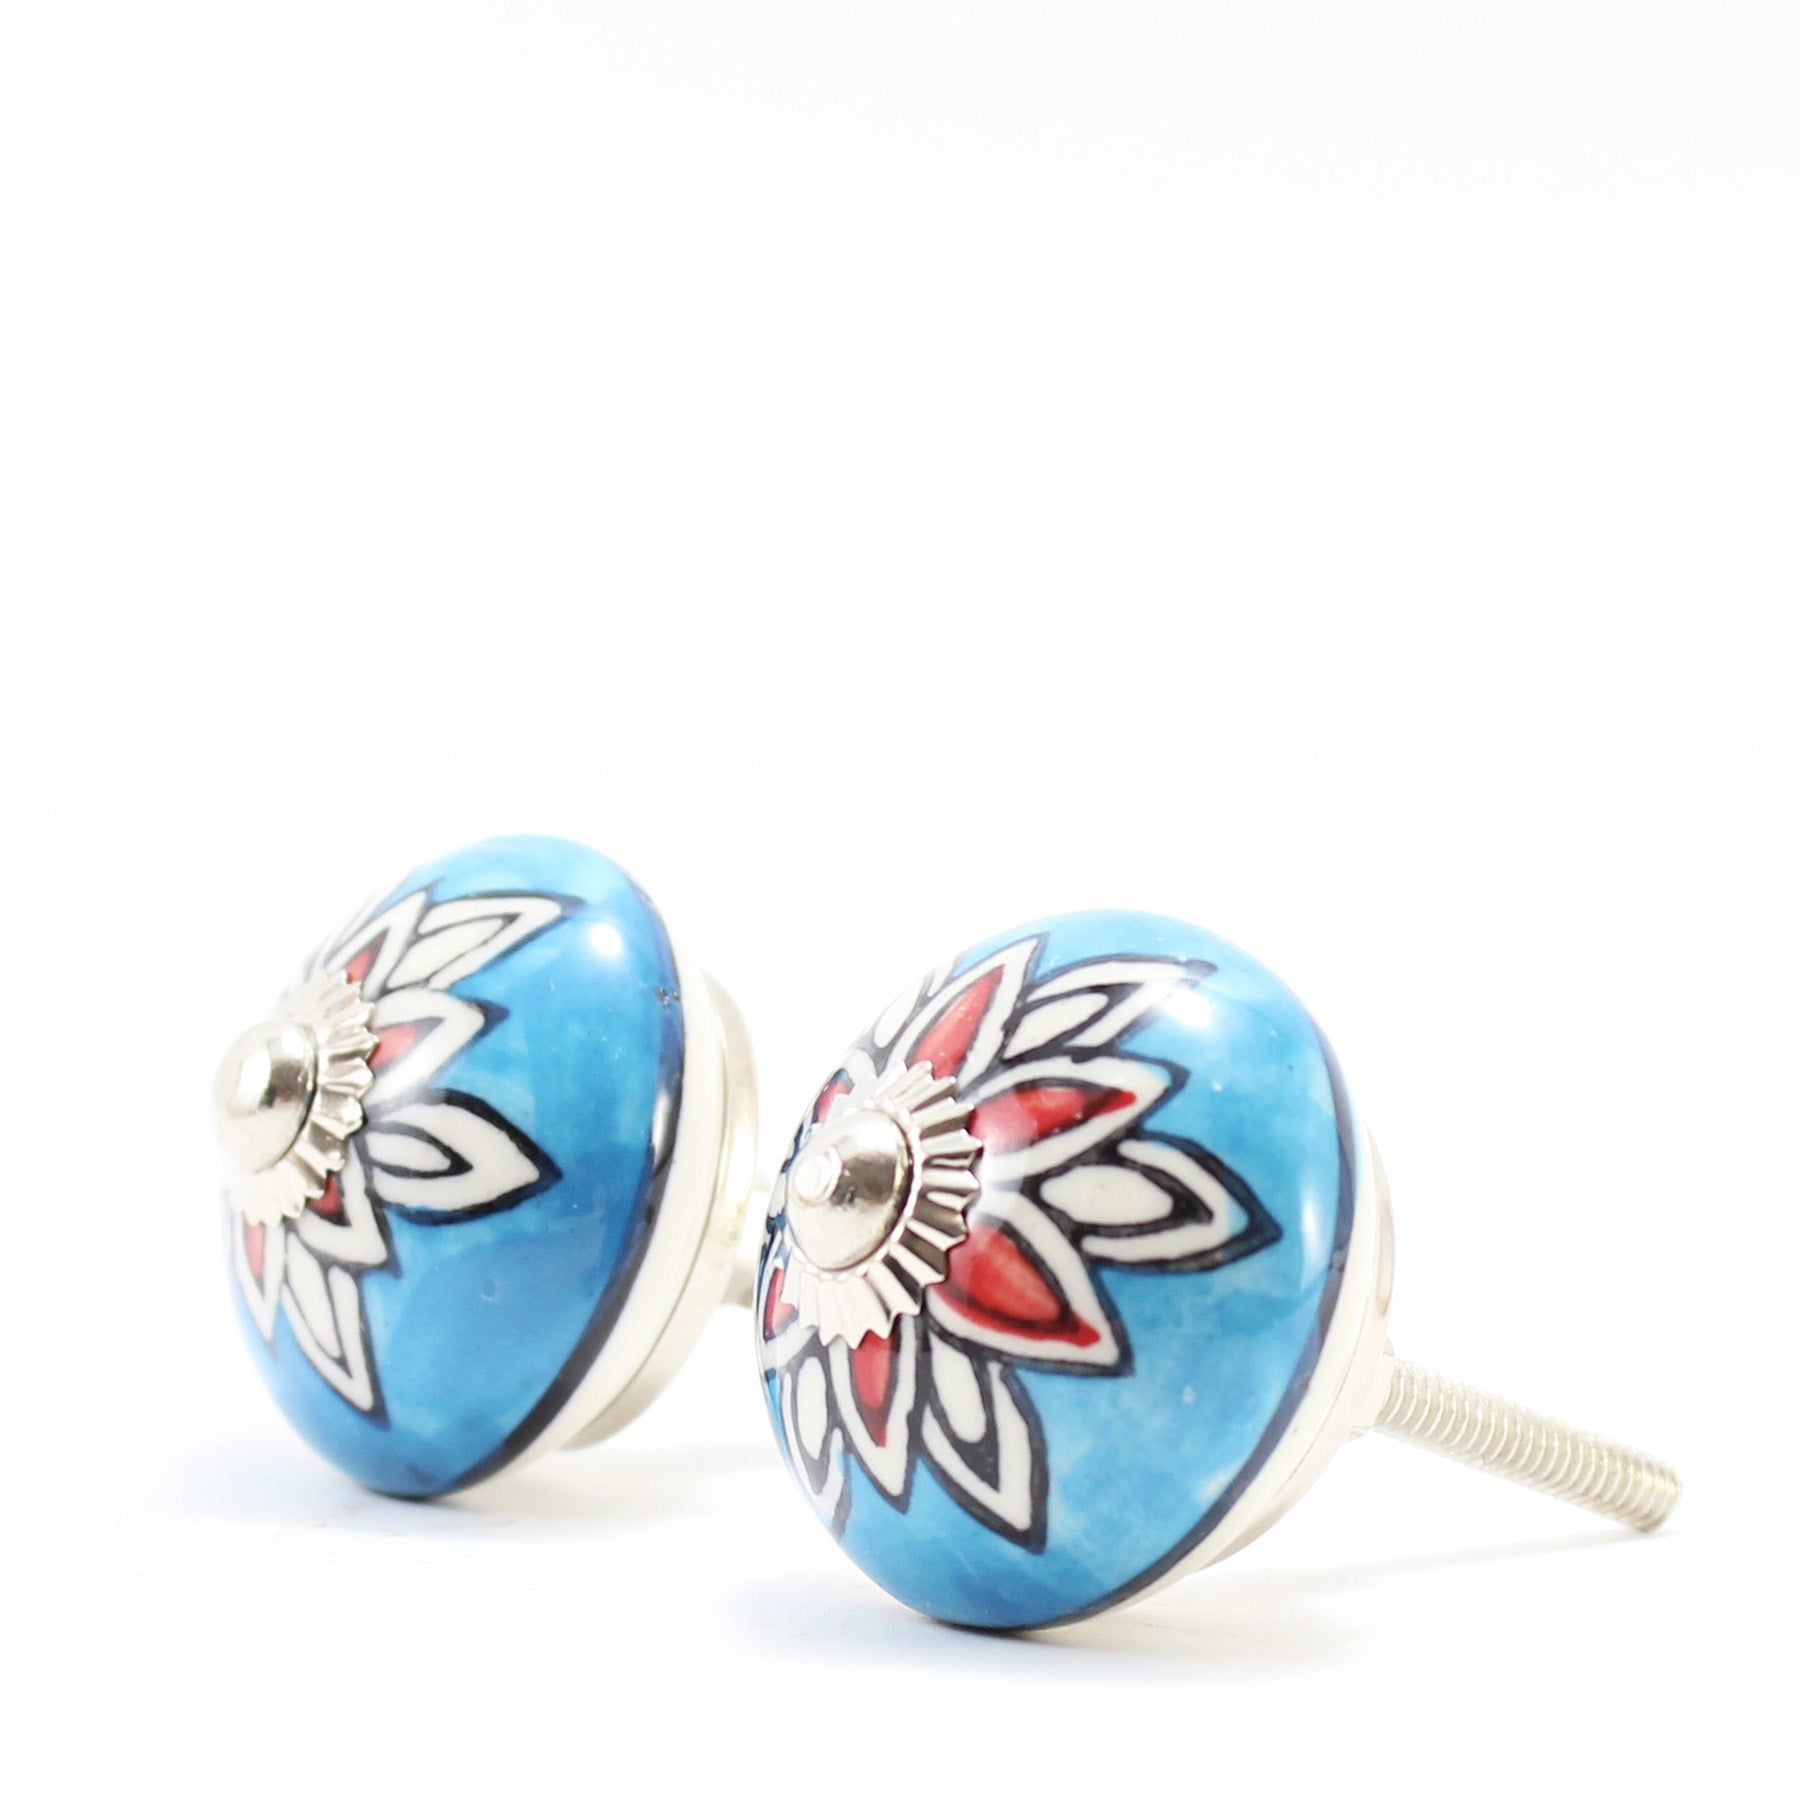 Hand Painted Ceramic Knobs XII